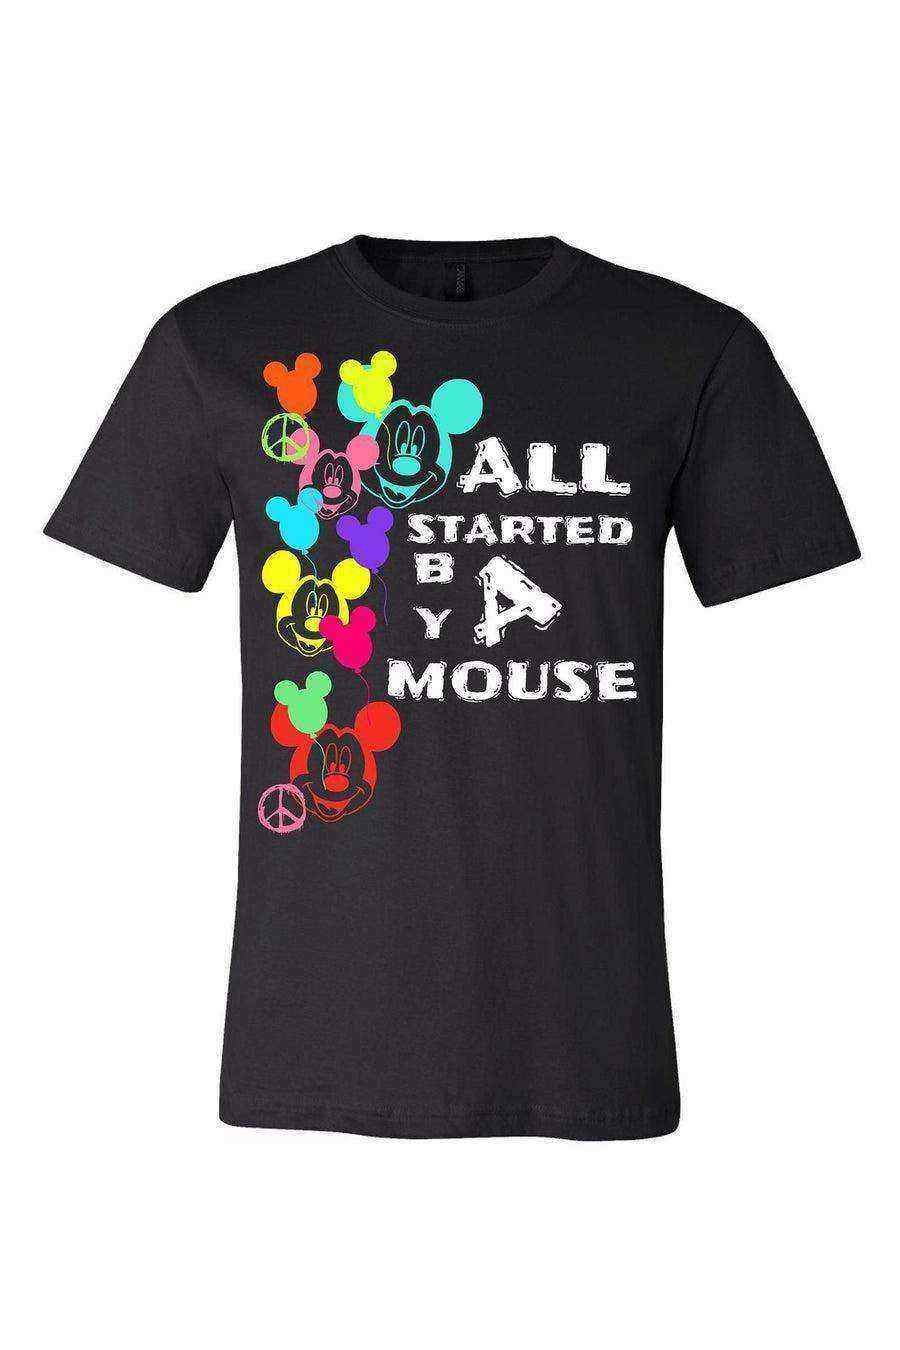 Toddler | All Started By A Mouse Shirt | Mickey Balloons Shirt - Dylan's Tees